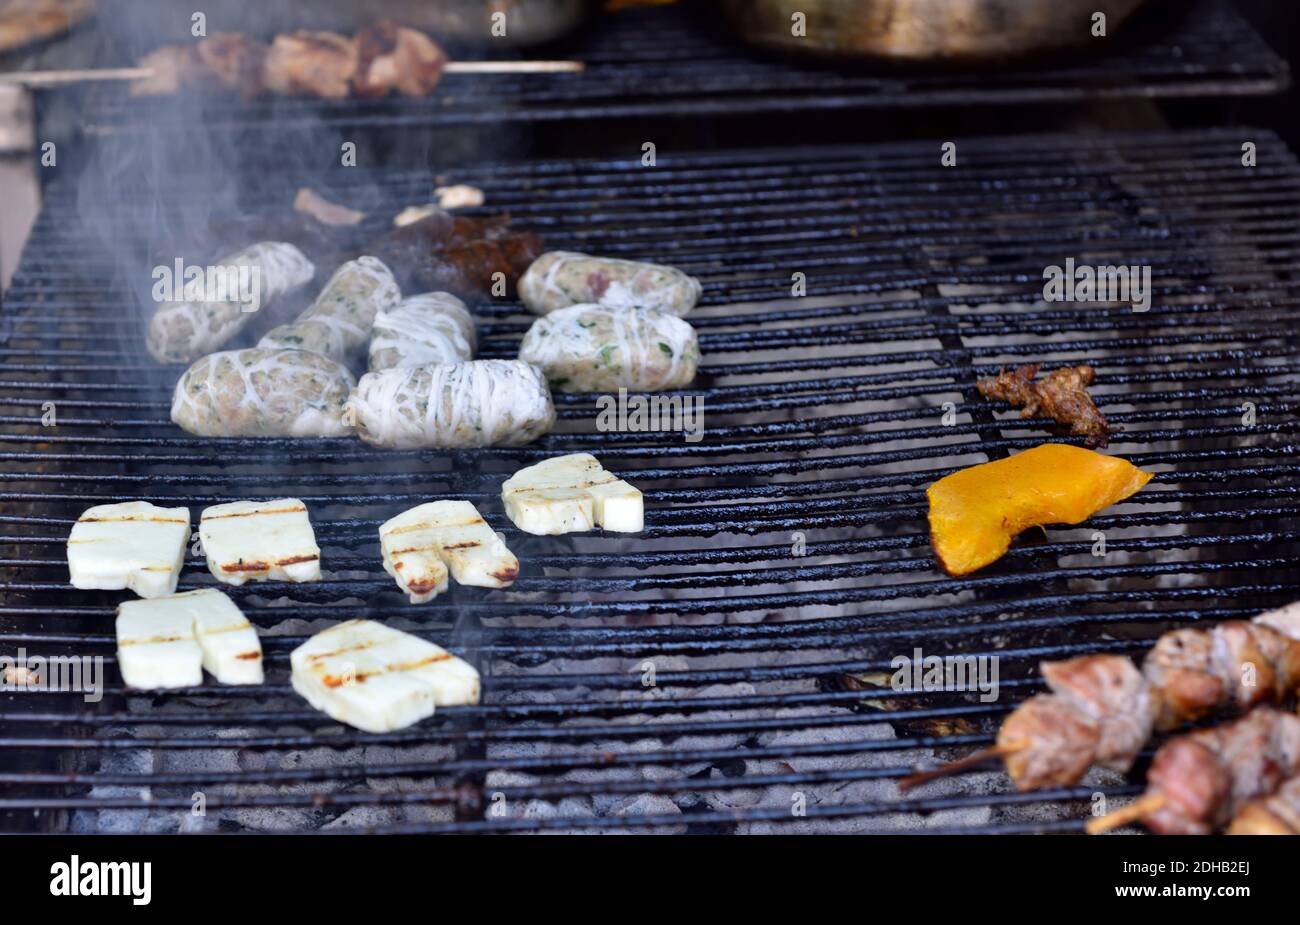 Grill of charcoal bar-b-cue with sausages and halloumi cheese cooking Stock Photo